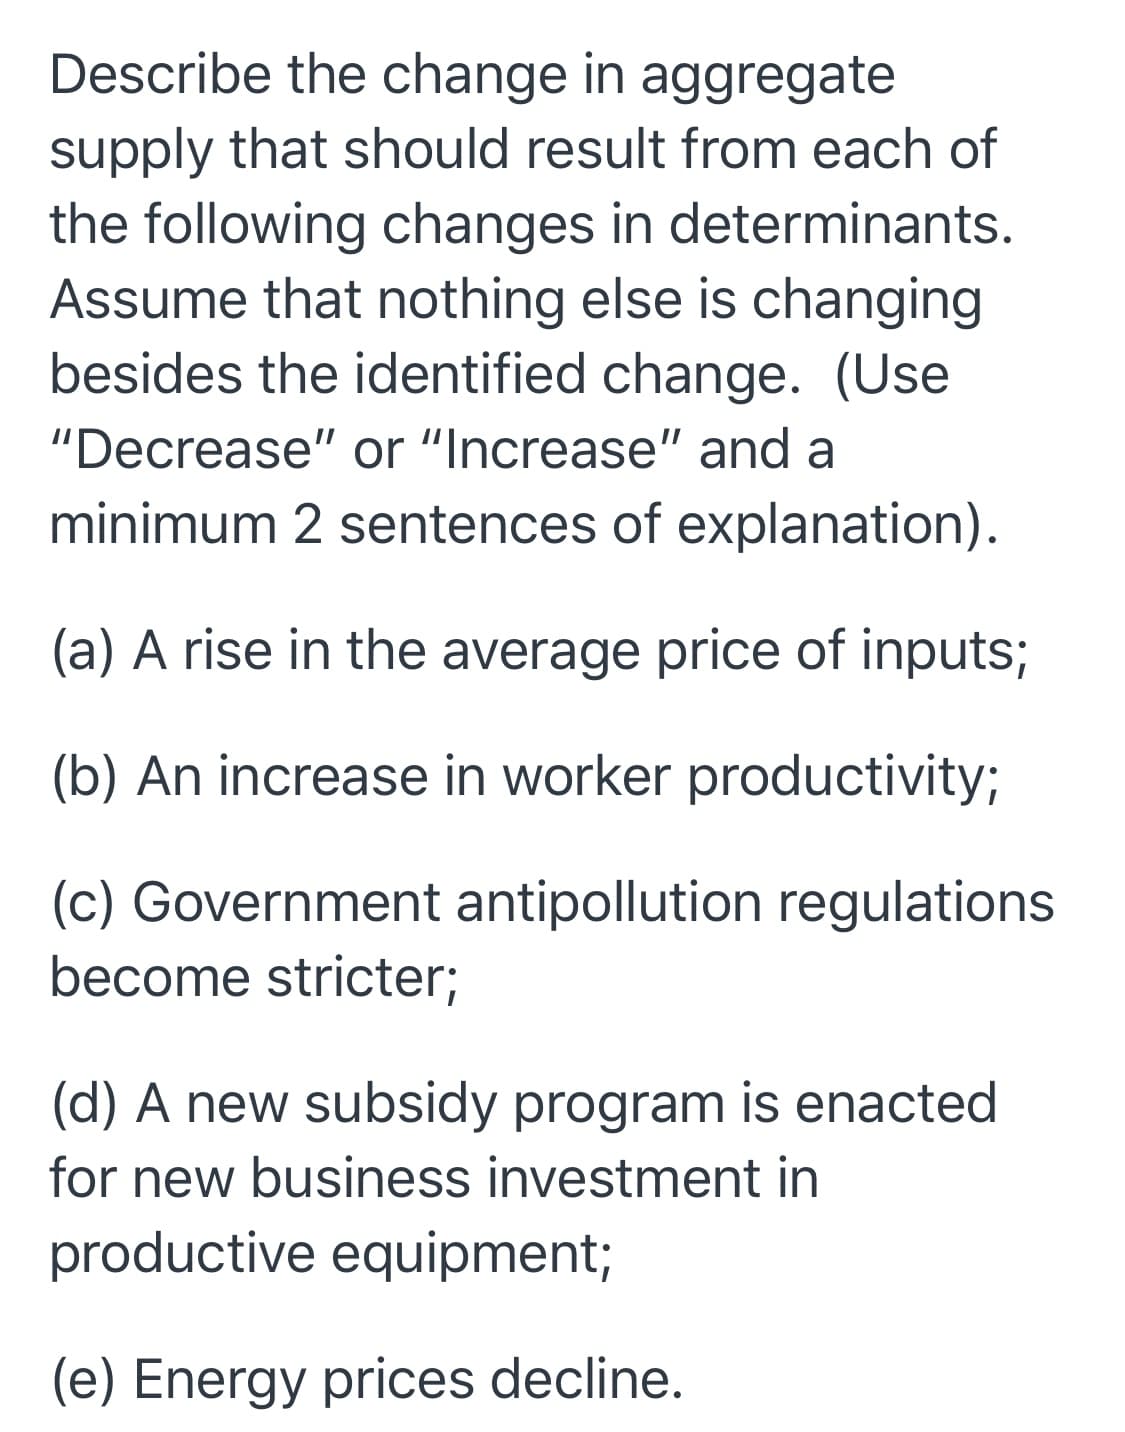 Describe the change in aggregate
supply that should result from each of
the following changes in determinants.
Assume that nothing else is changing
besides the identified change. (Use
"Decrease" or "Increase" and a
minimum 2 sentences of explanation).
(a) A rise in the average price of inputs;
(b) An increase in worker productivity;
(c) Government antipollution regulations
become stricter;
(d) A new subsidy program is enacted
for new business investment in
productive equipment;
(e) Energy prices decline.
